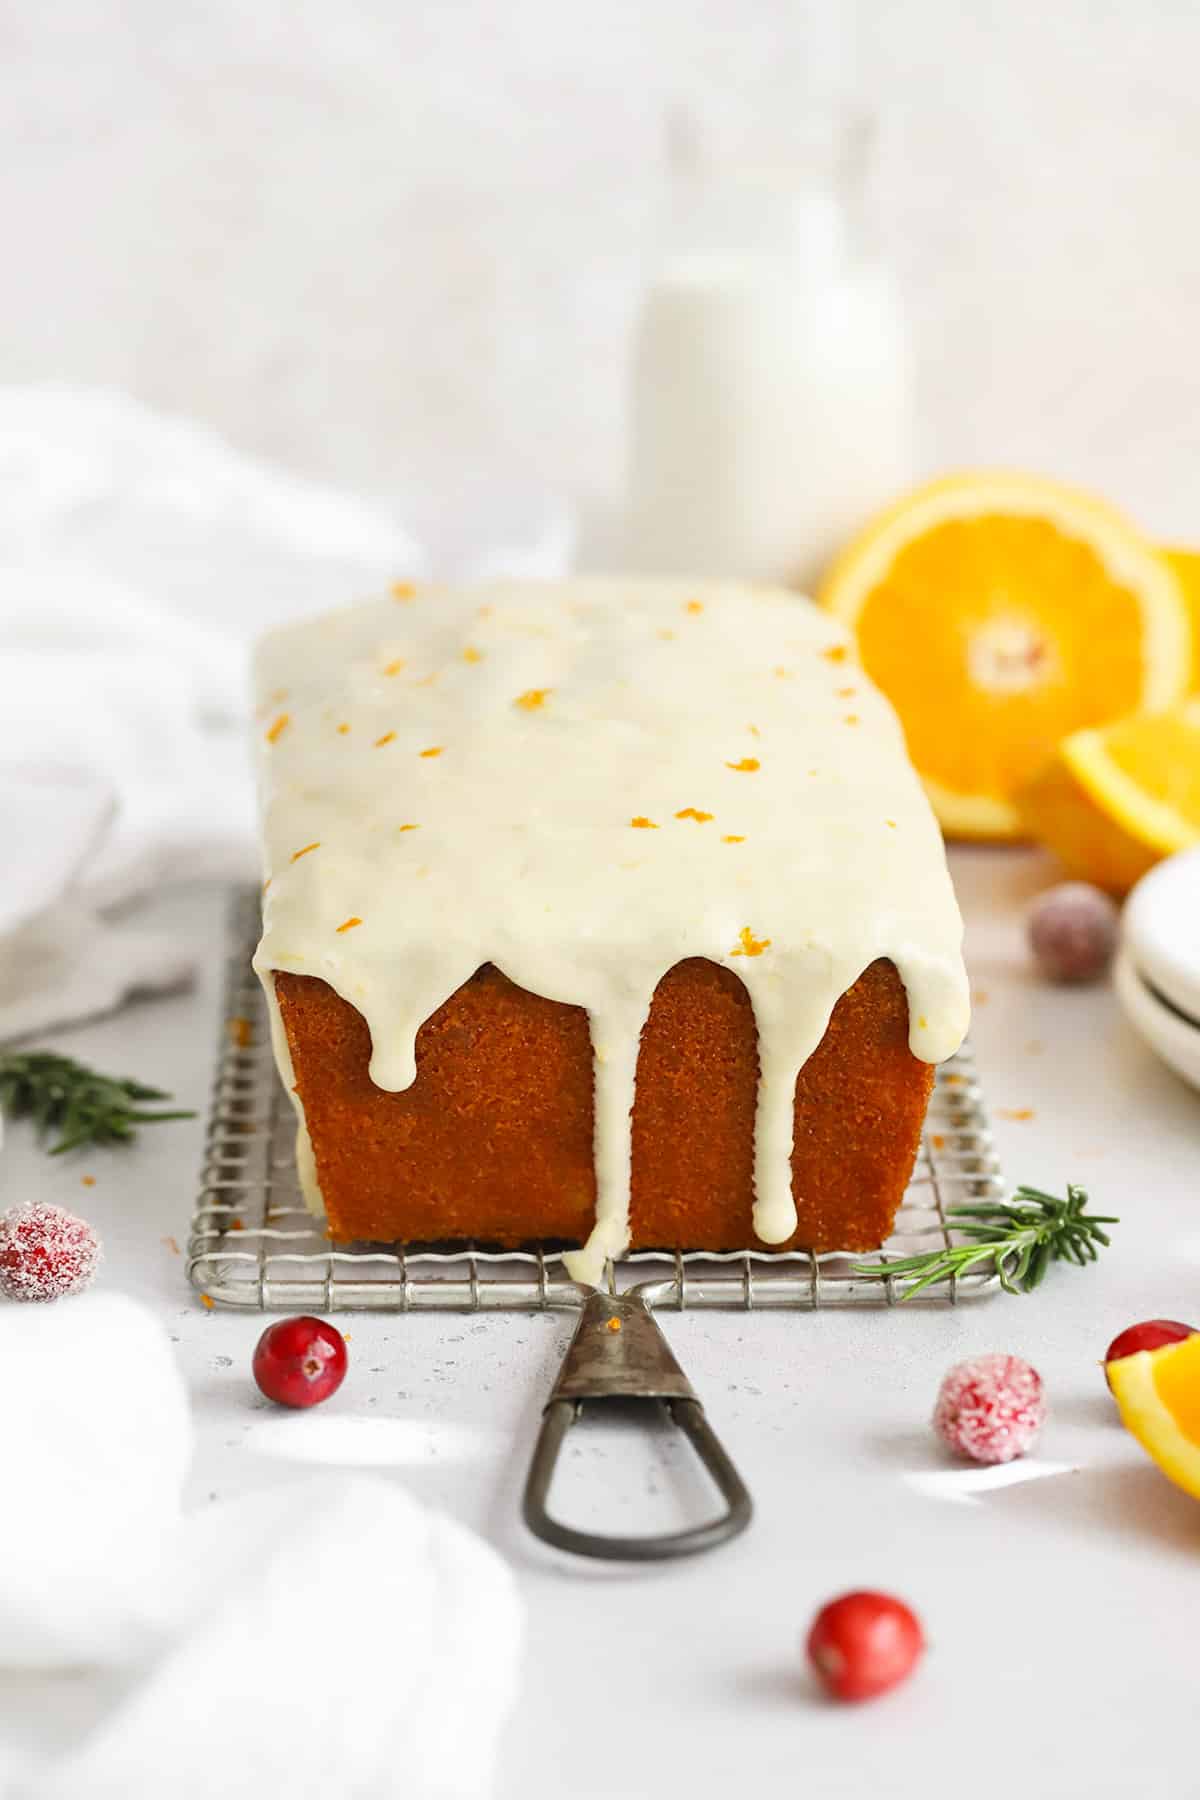 Front view of gluten-free cranberry orange loaf cake with orange glaze dripping down the sides